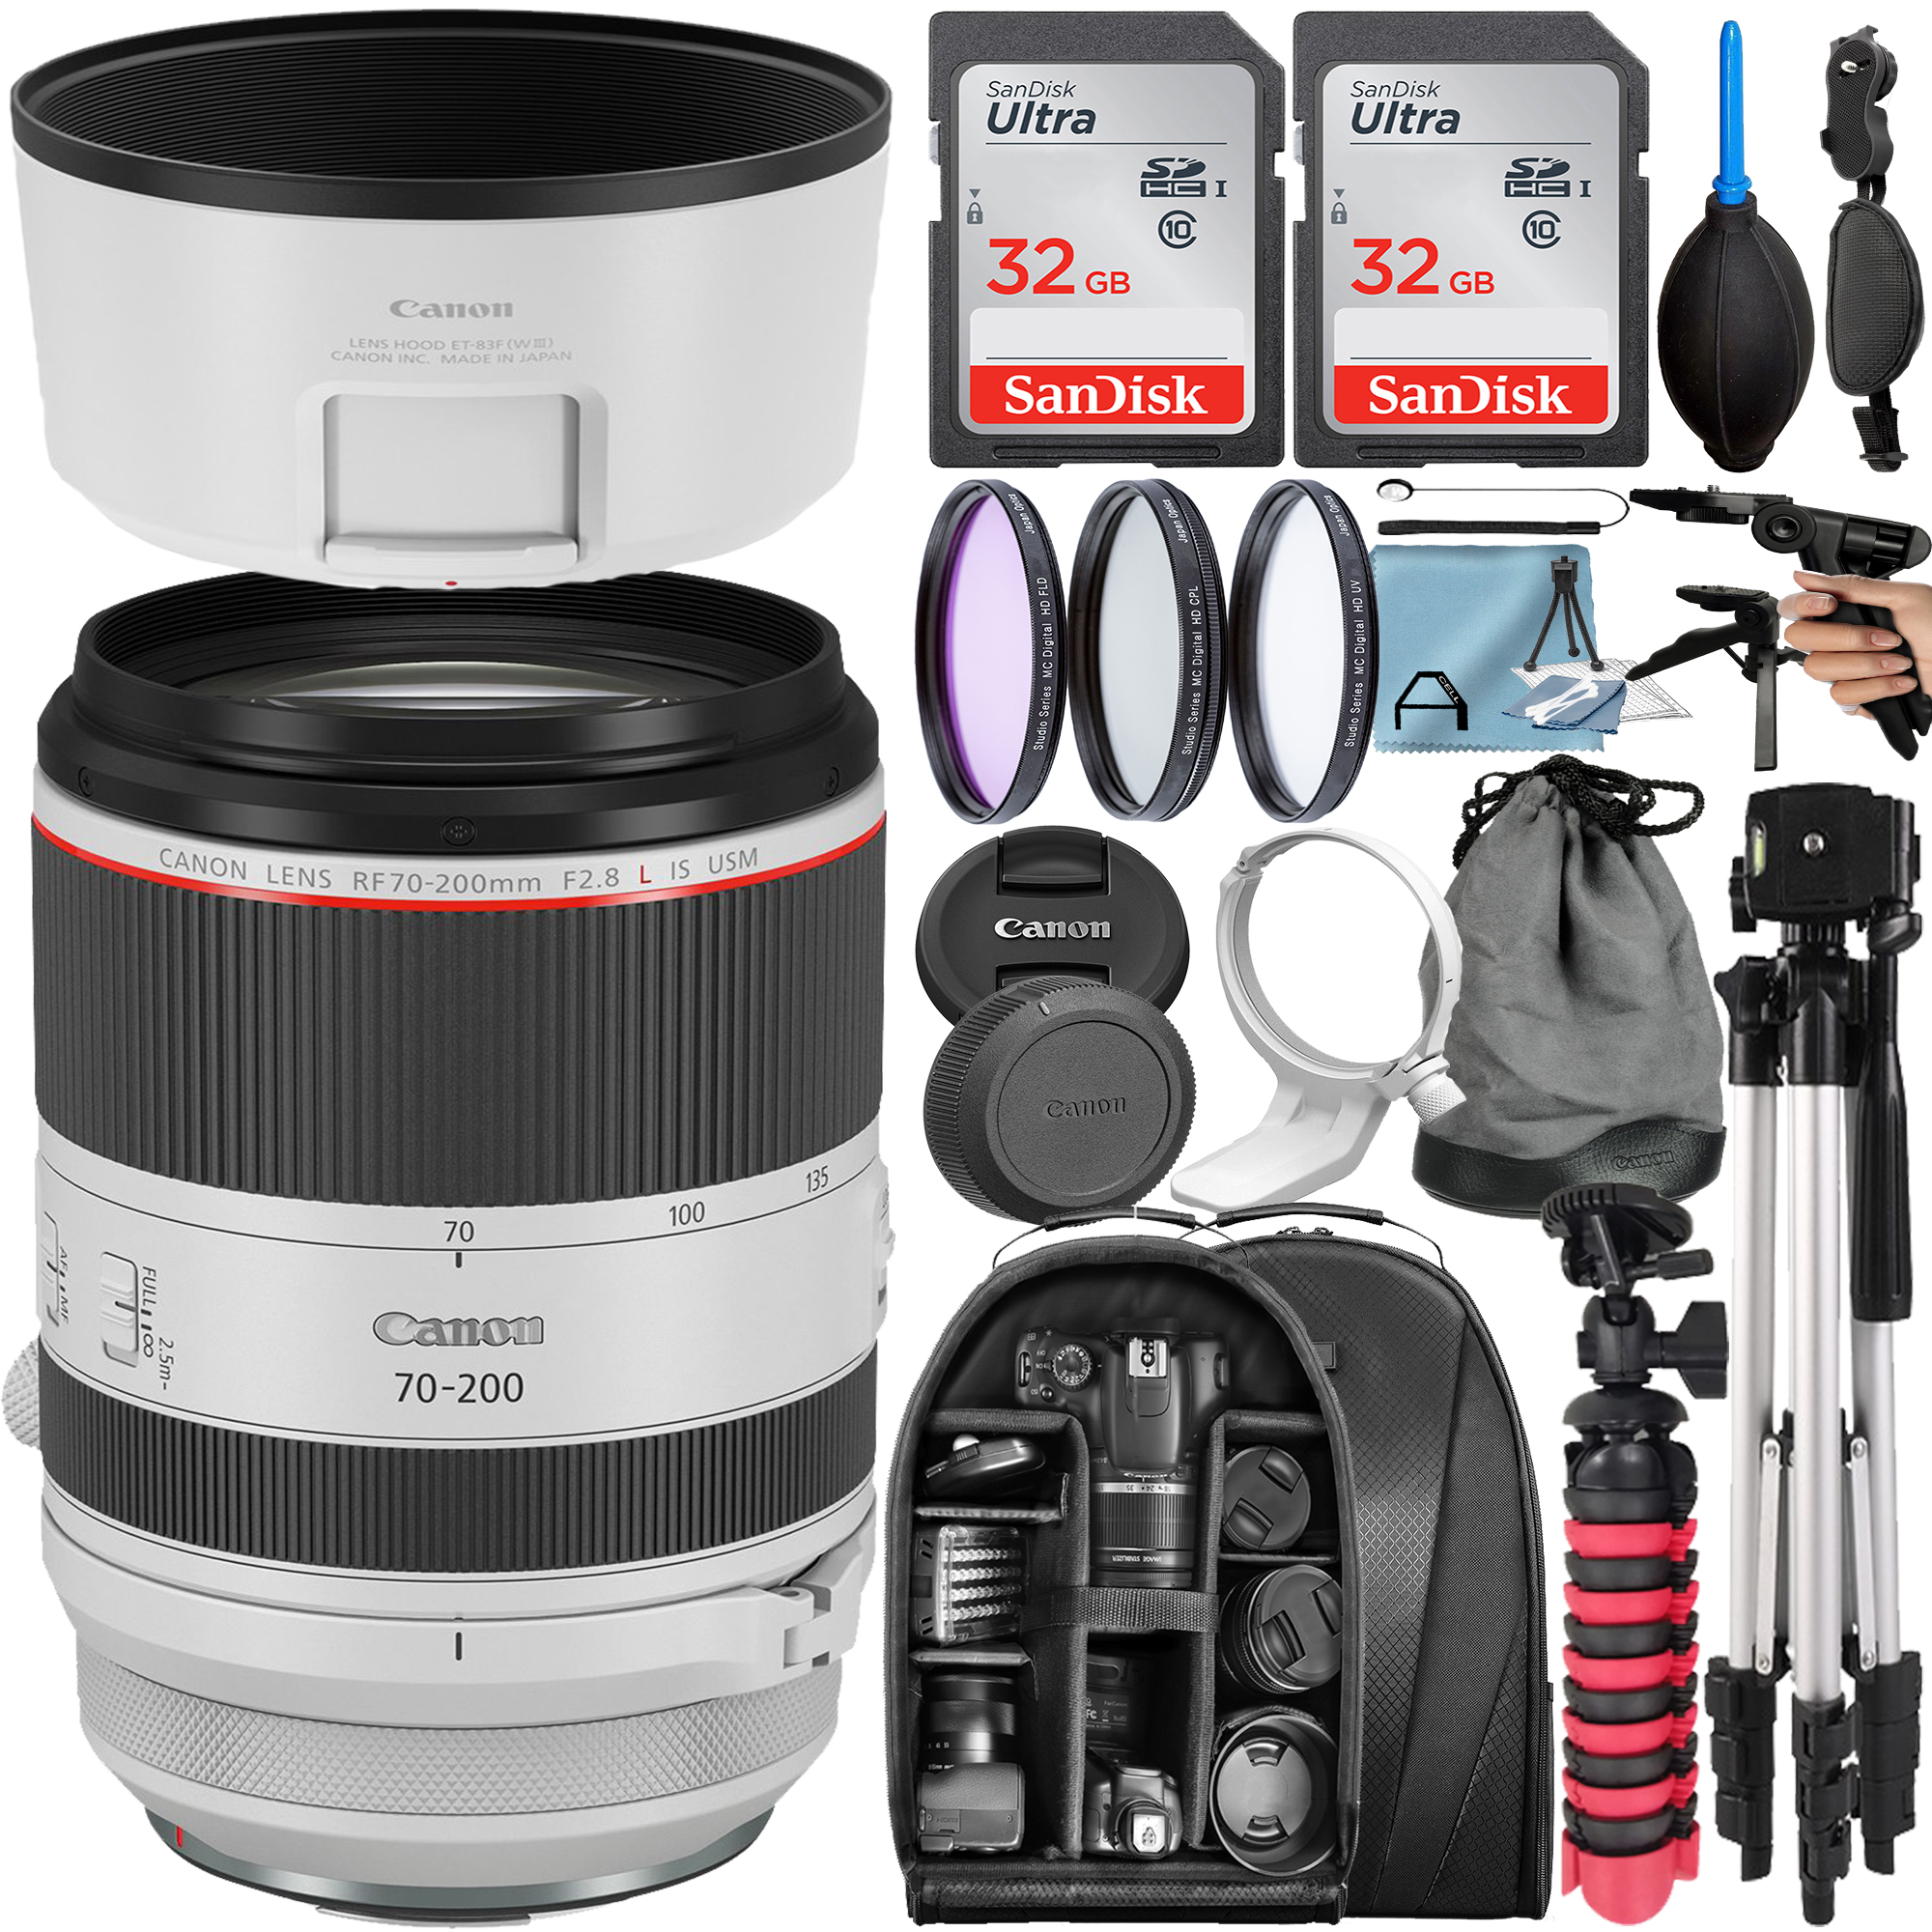 Canon RF 70-200mm F/2.8 L IS USM Telephoto Zoom Lens with 2 Pack 32GB SanDisk Memory Card + Tripod + Backpack + A-Cell Accessory Bundle